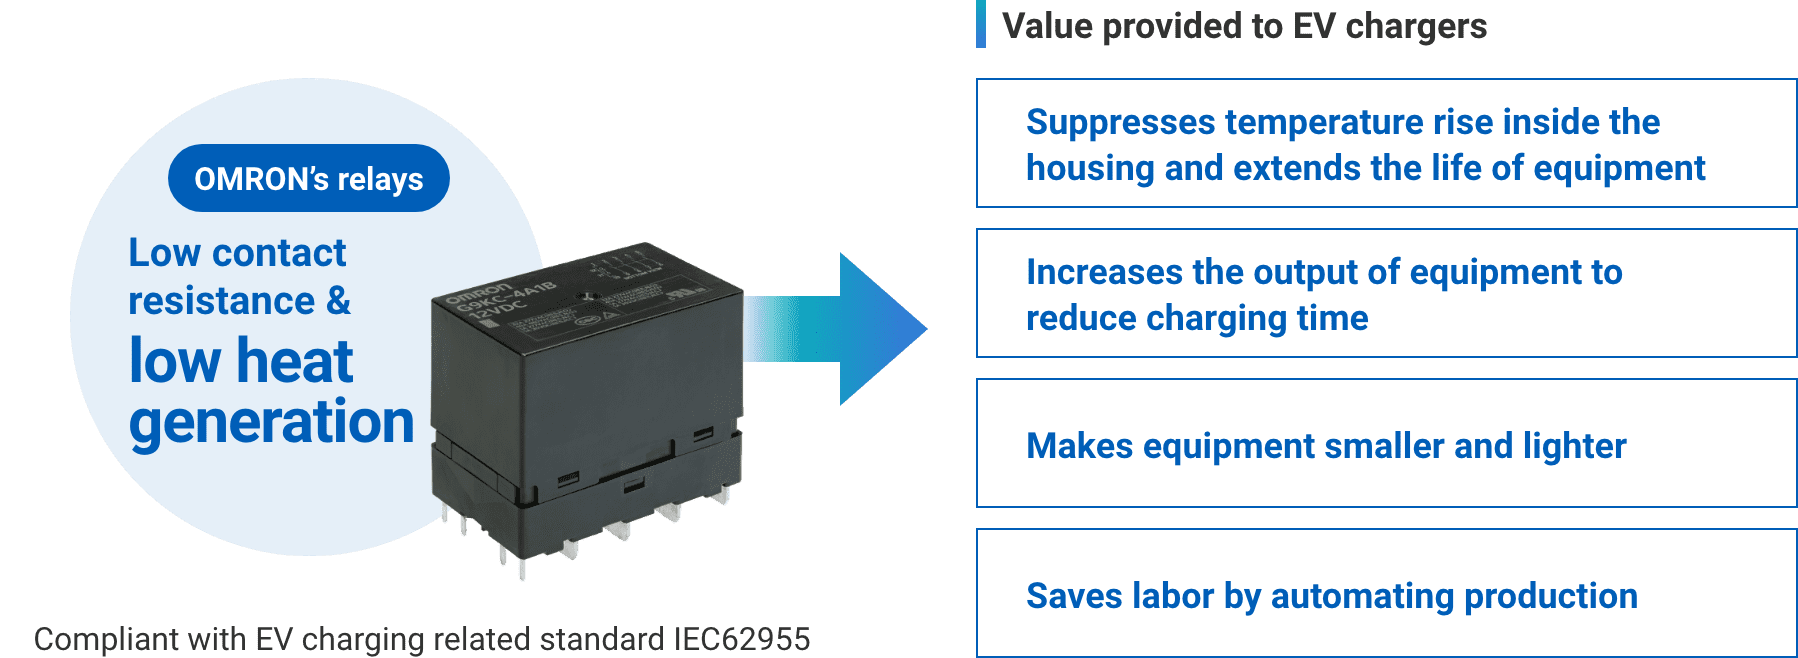 OMRON's relays: Low contact resistance & low heat generation => Value provided to EV chargers: (Suppresses temperature rise inside the housing and extends the life of equipment、Increases the output of equipment to reduce charging time、Makes equipment smaller and lighter、Saves labor by automating production) Compliant with EV charging related standard IEC62955